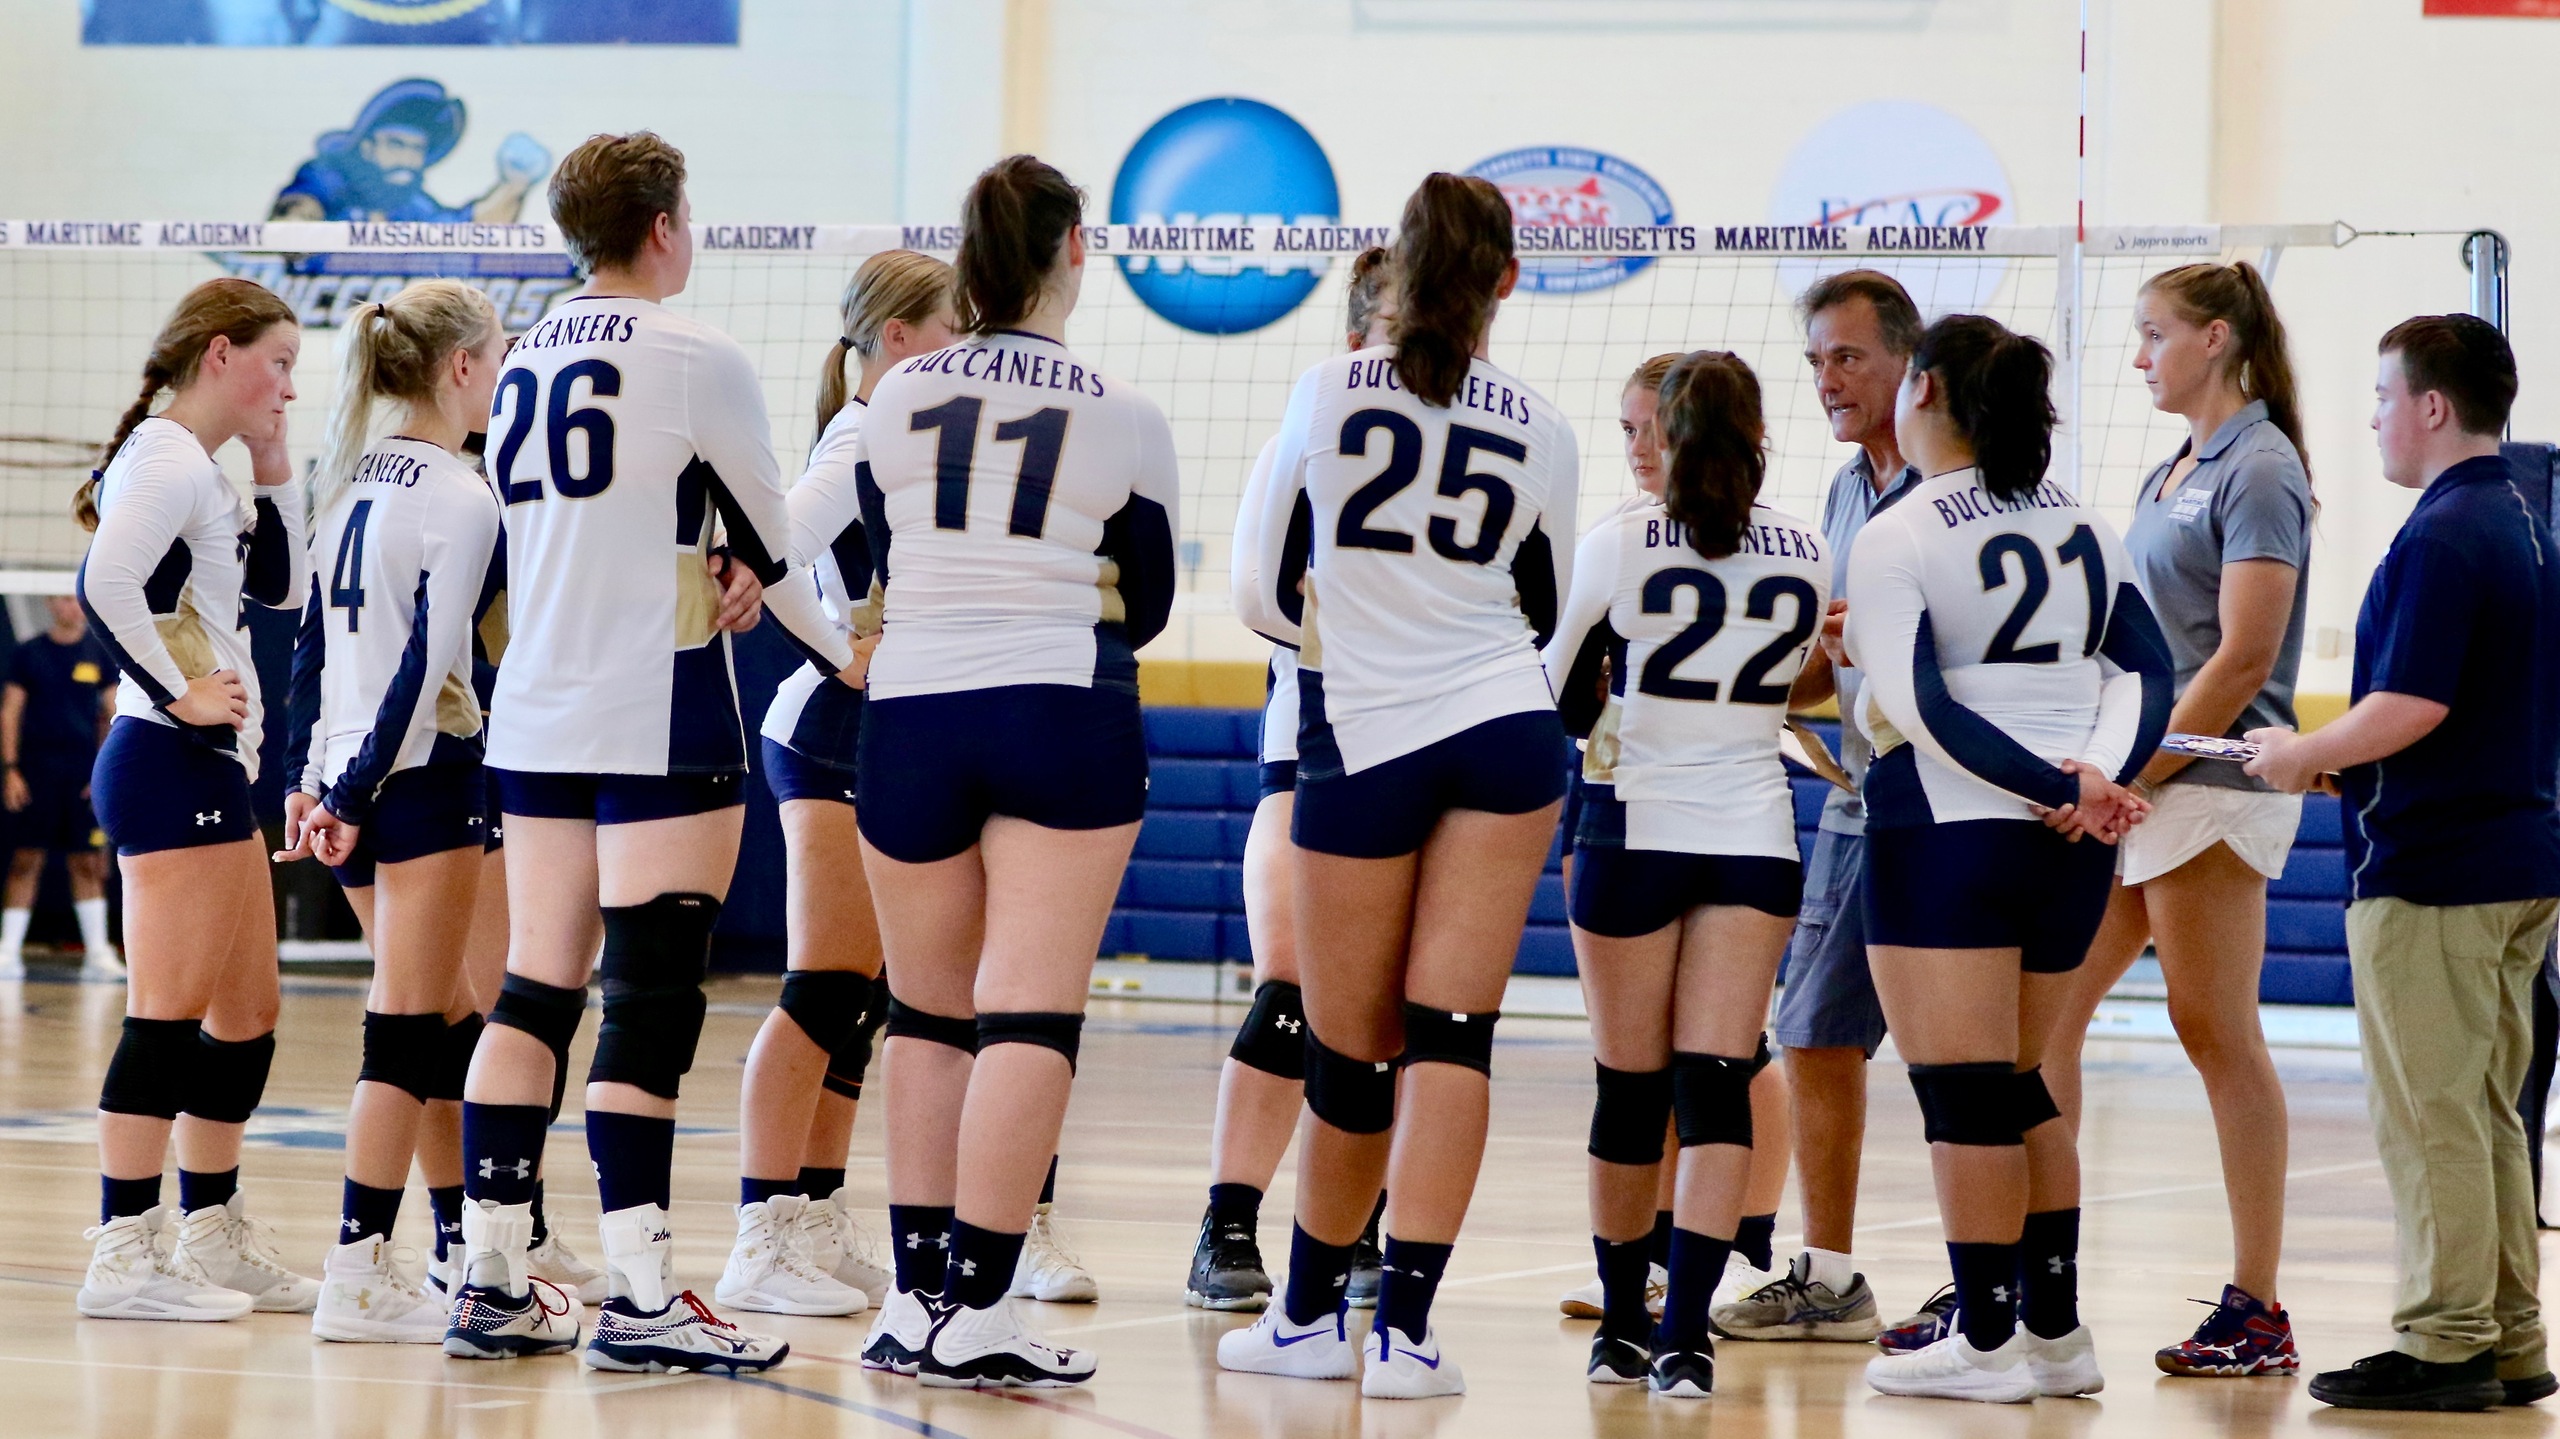 Volleyball: Bucs Lose Both Legs of Tri-Match in Battle with Dean and Fisher